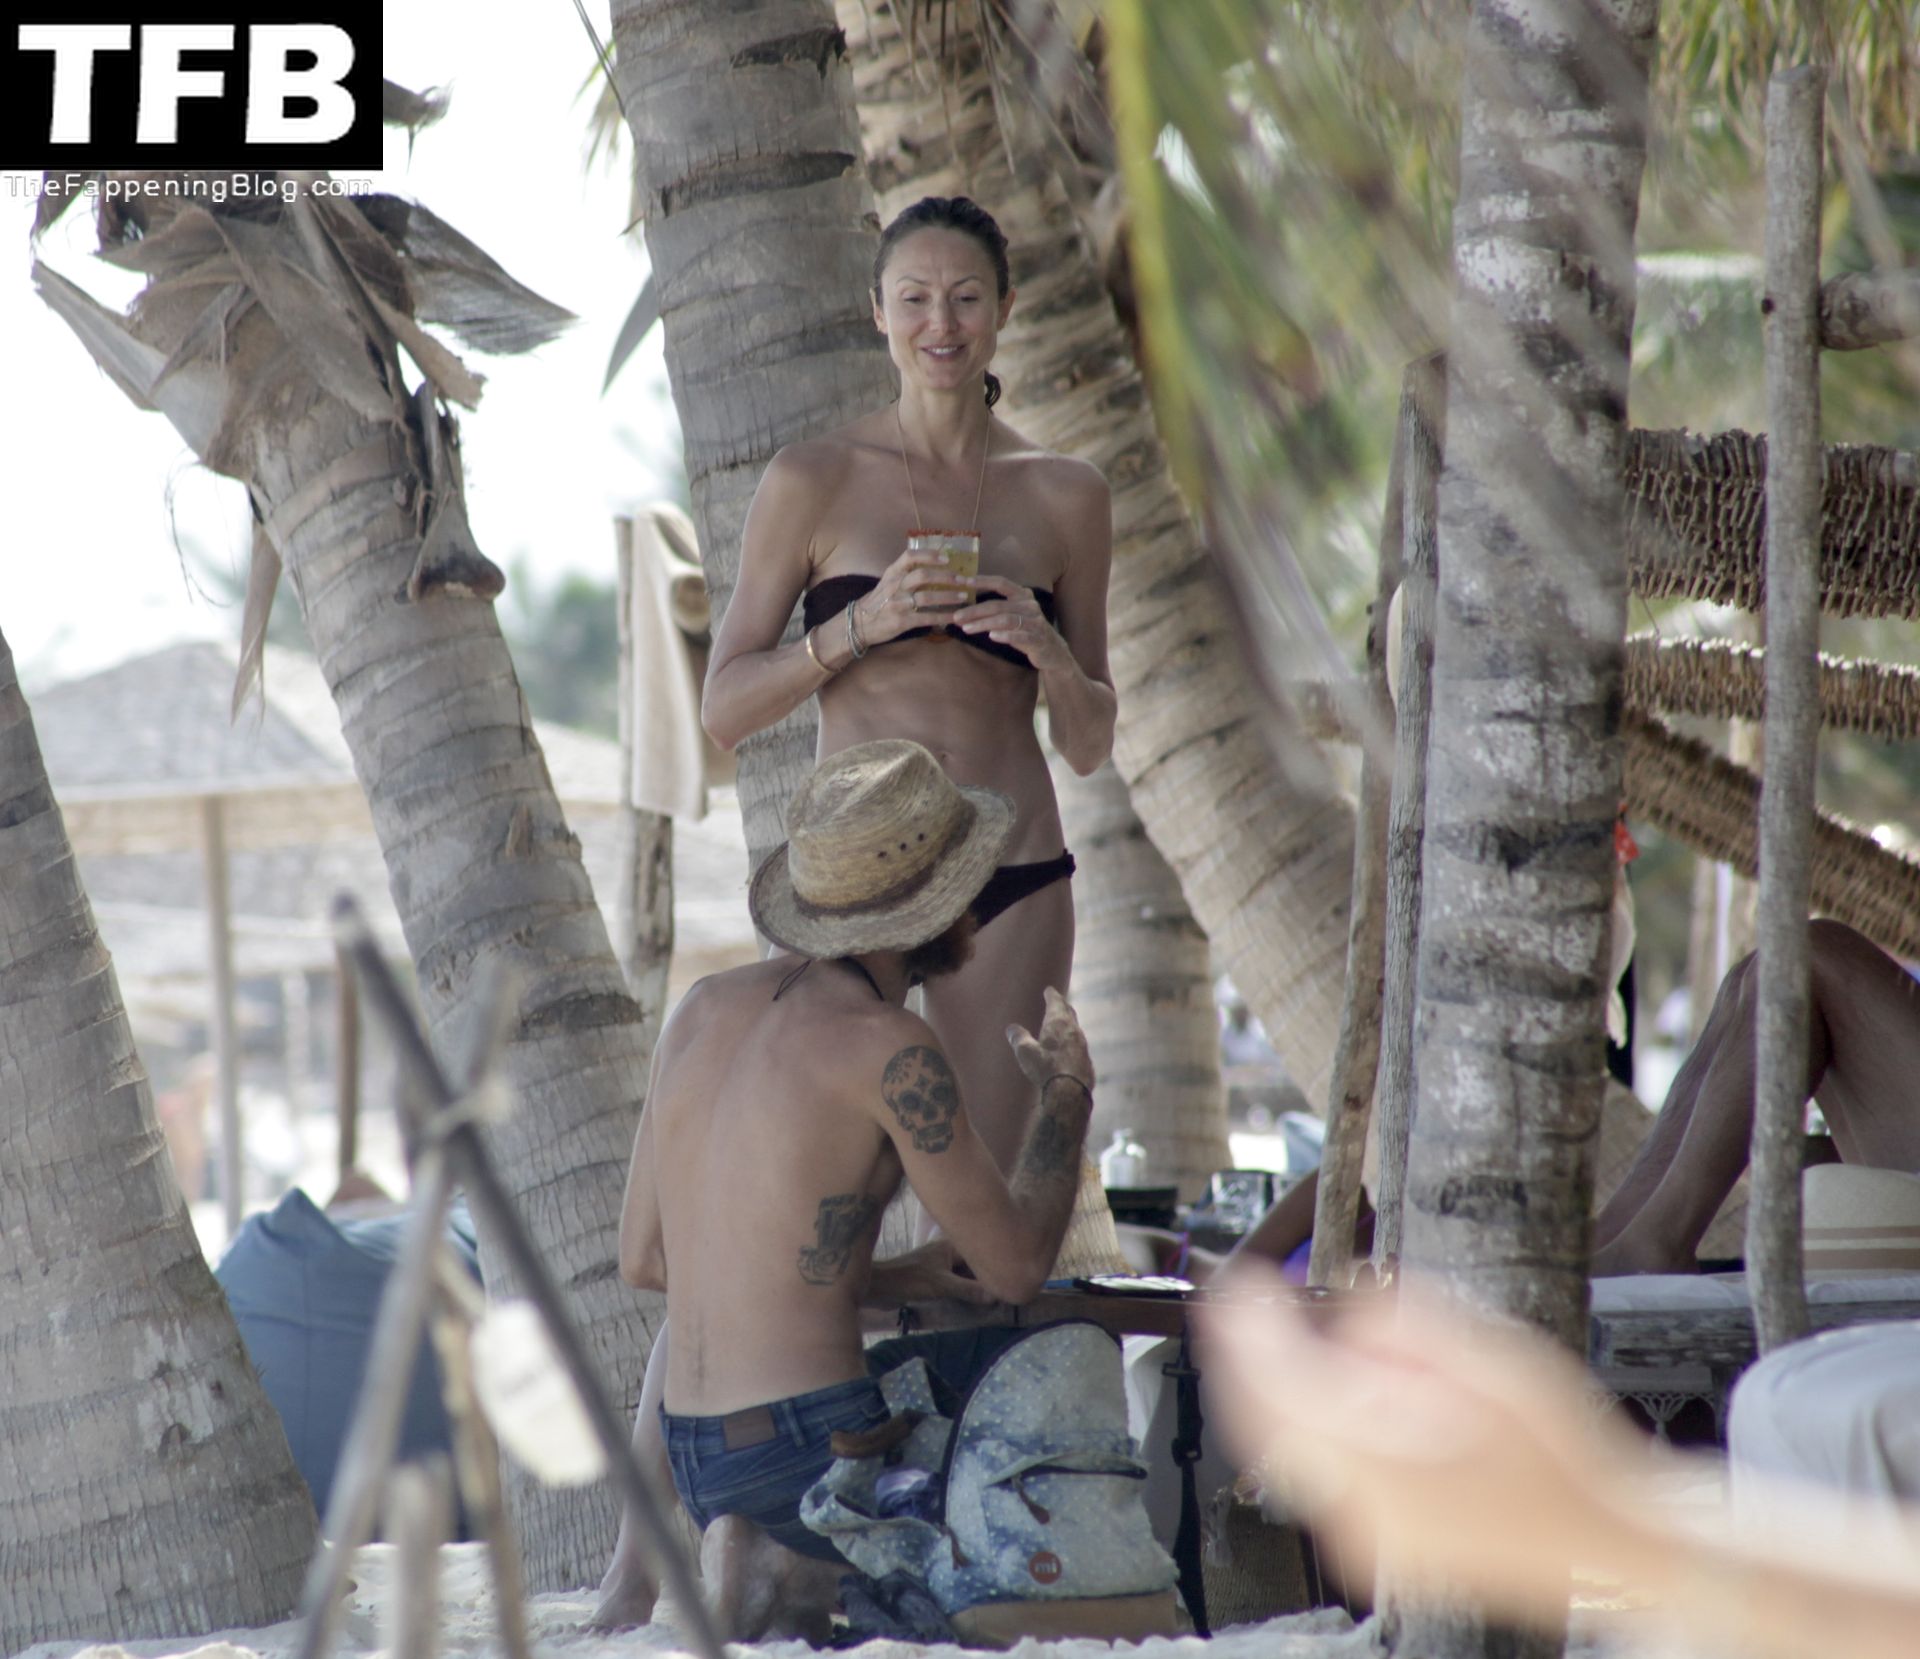 Stacy Keibler & Jared Pobre Enjoy the Day at the Beach in Tulum (59 Photos)